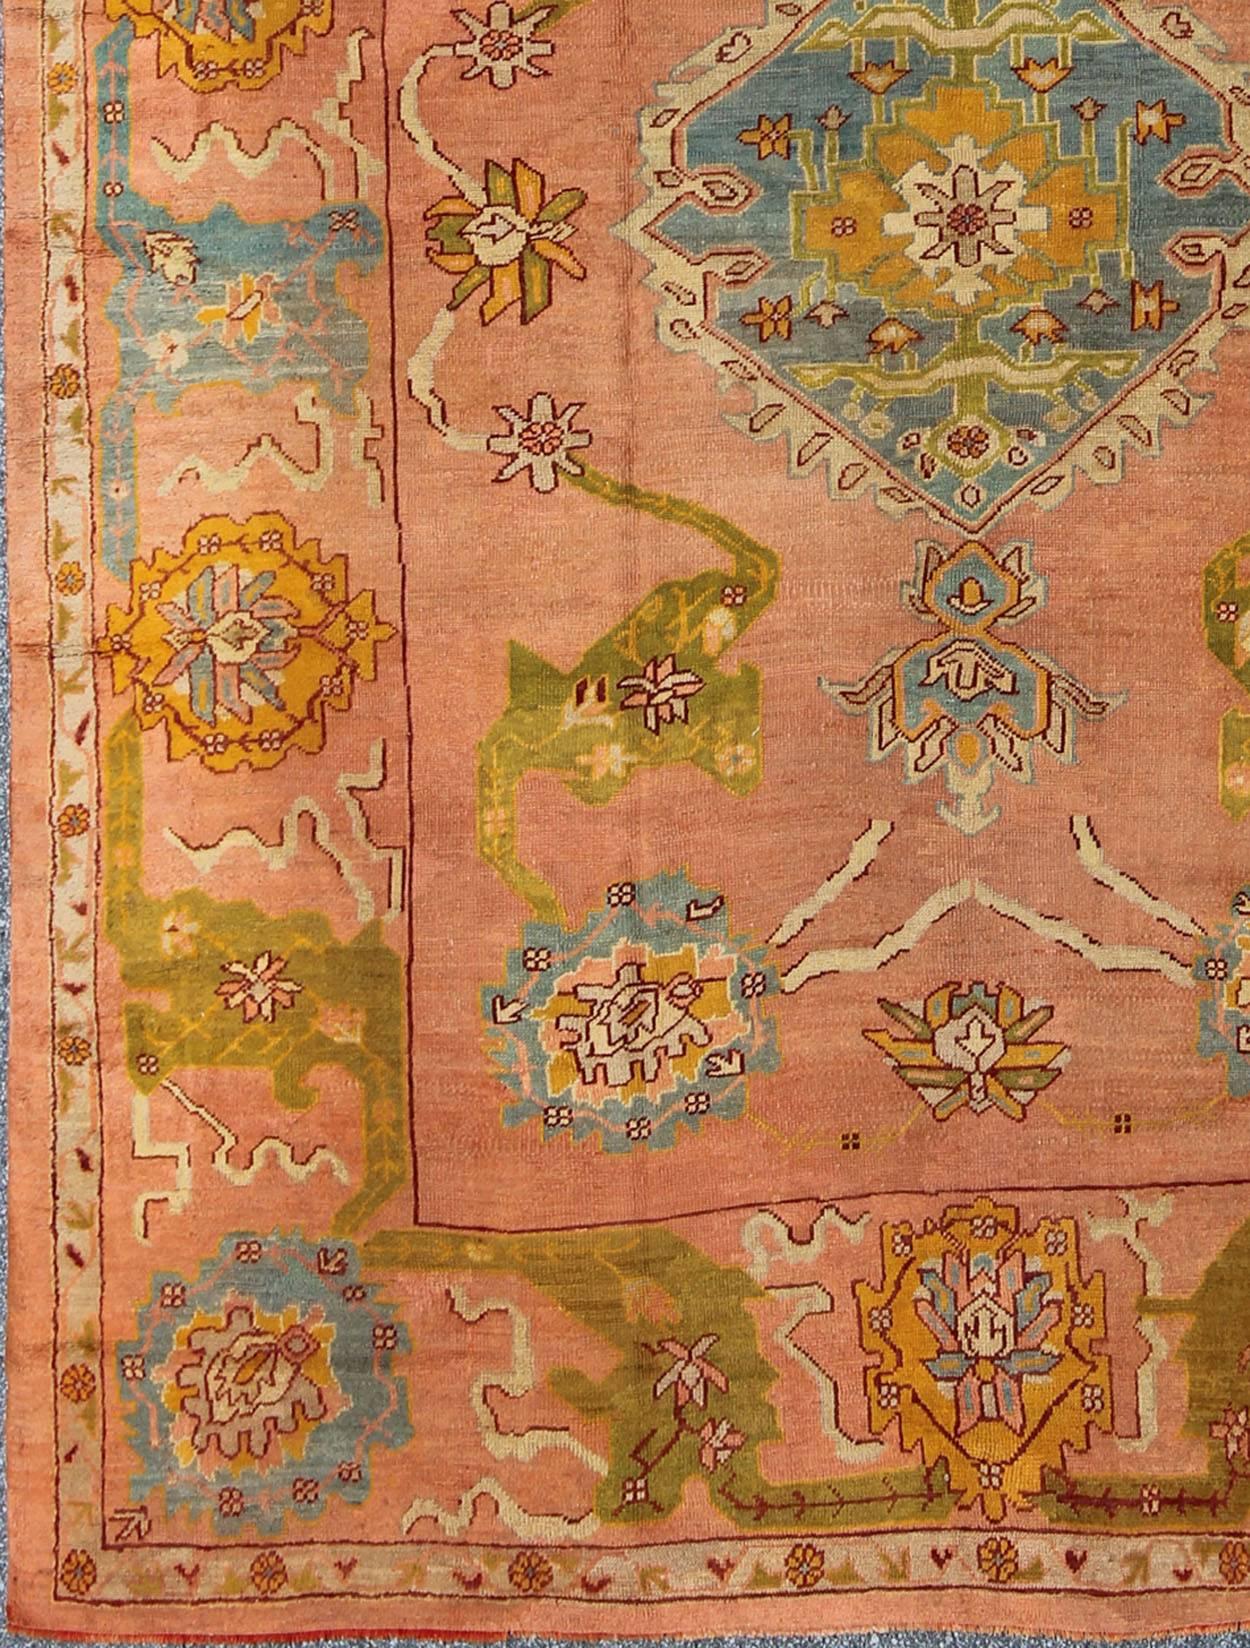 The richly opulent colors and unusual design of this antique Oushak carpet transport you to the romantic era when Kubla Khan traveled the Far East in search of exotic treasures. Beautiful Turkish late 19th Century craftsmanship and inspiring